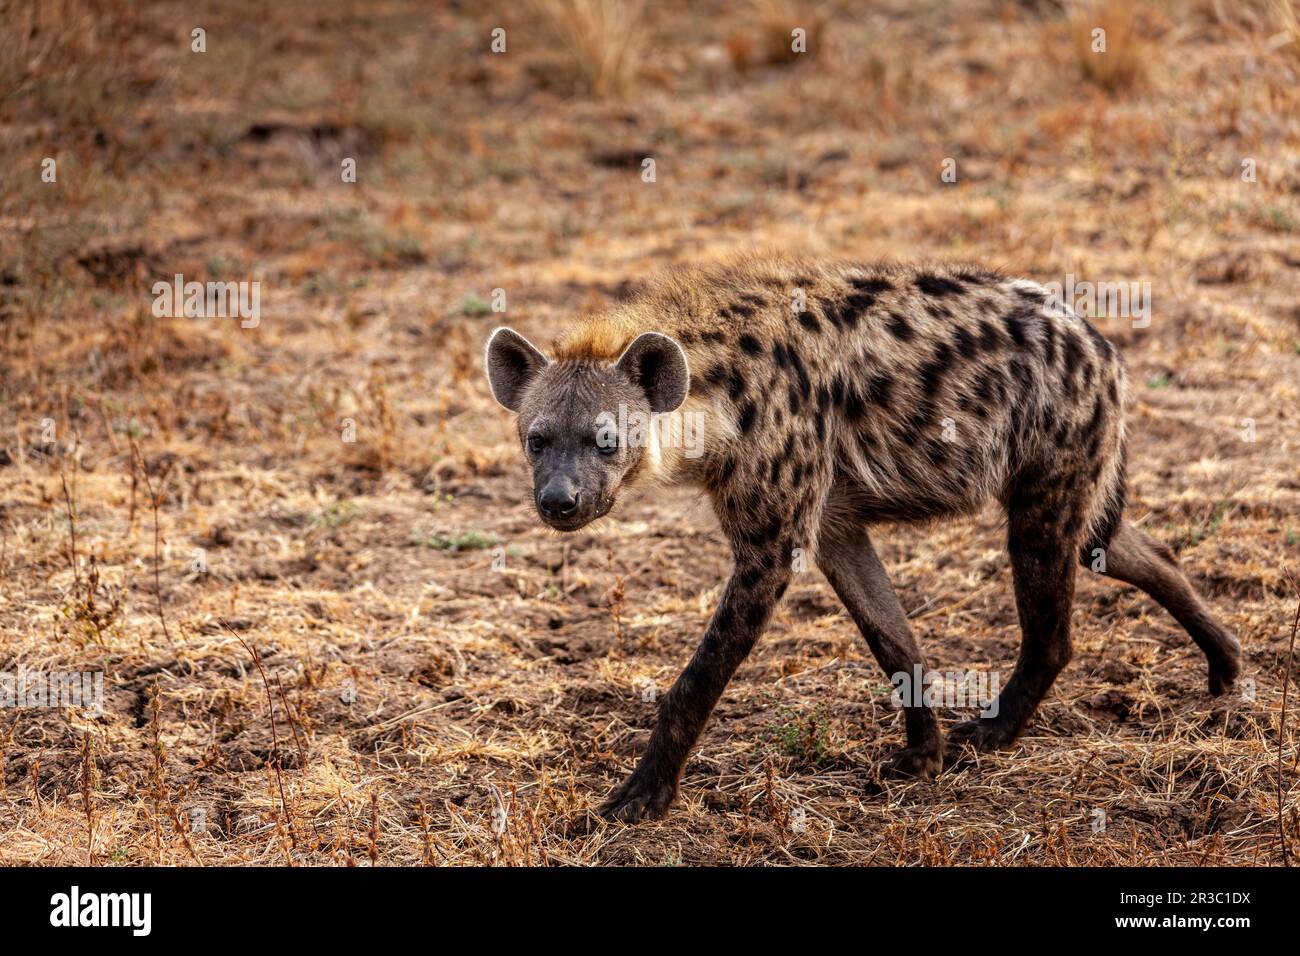 close-up of a spotted hyena in the Zambian savannah Stock Photo